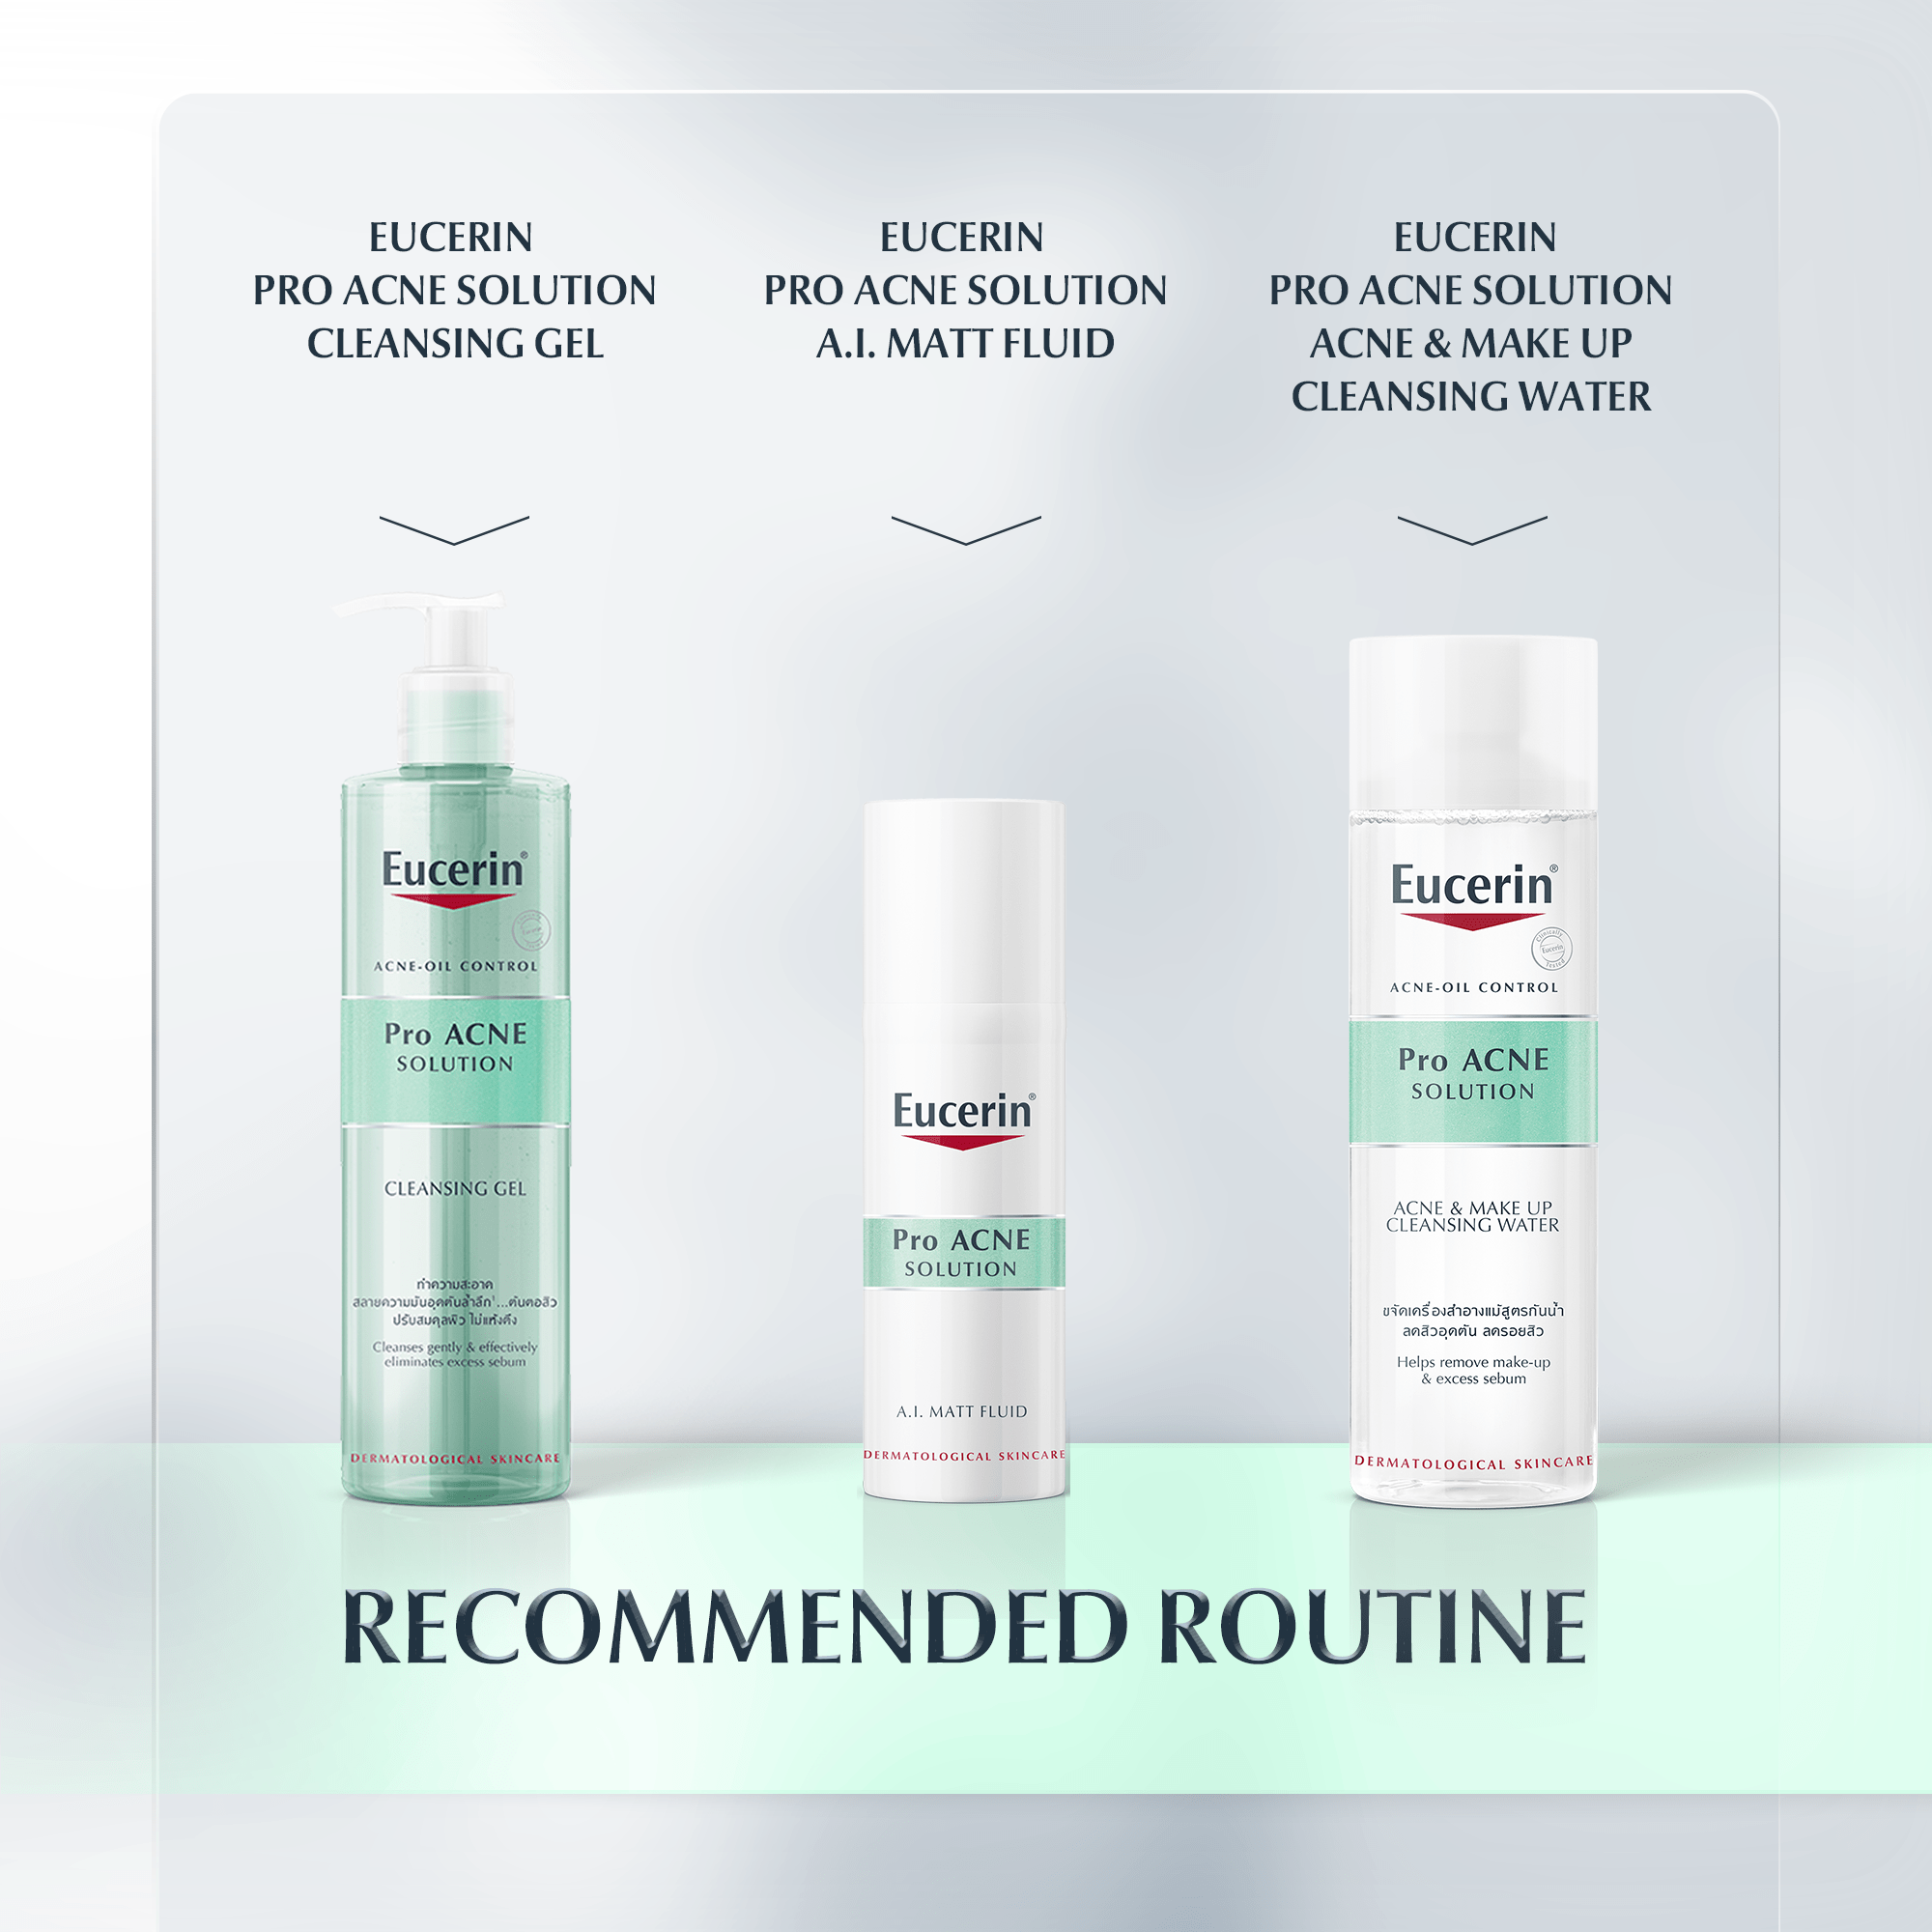 Recommended Proacne ran